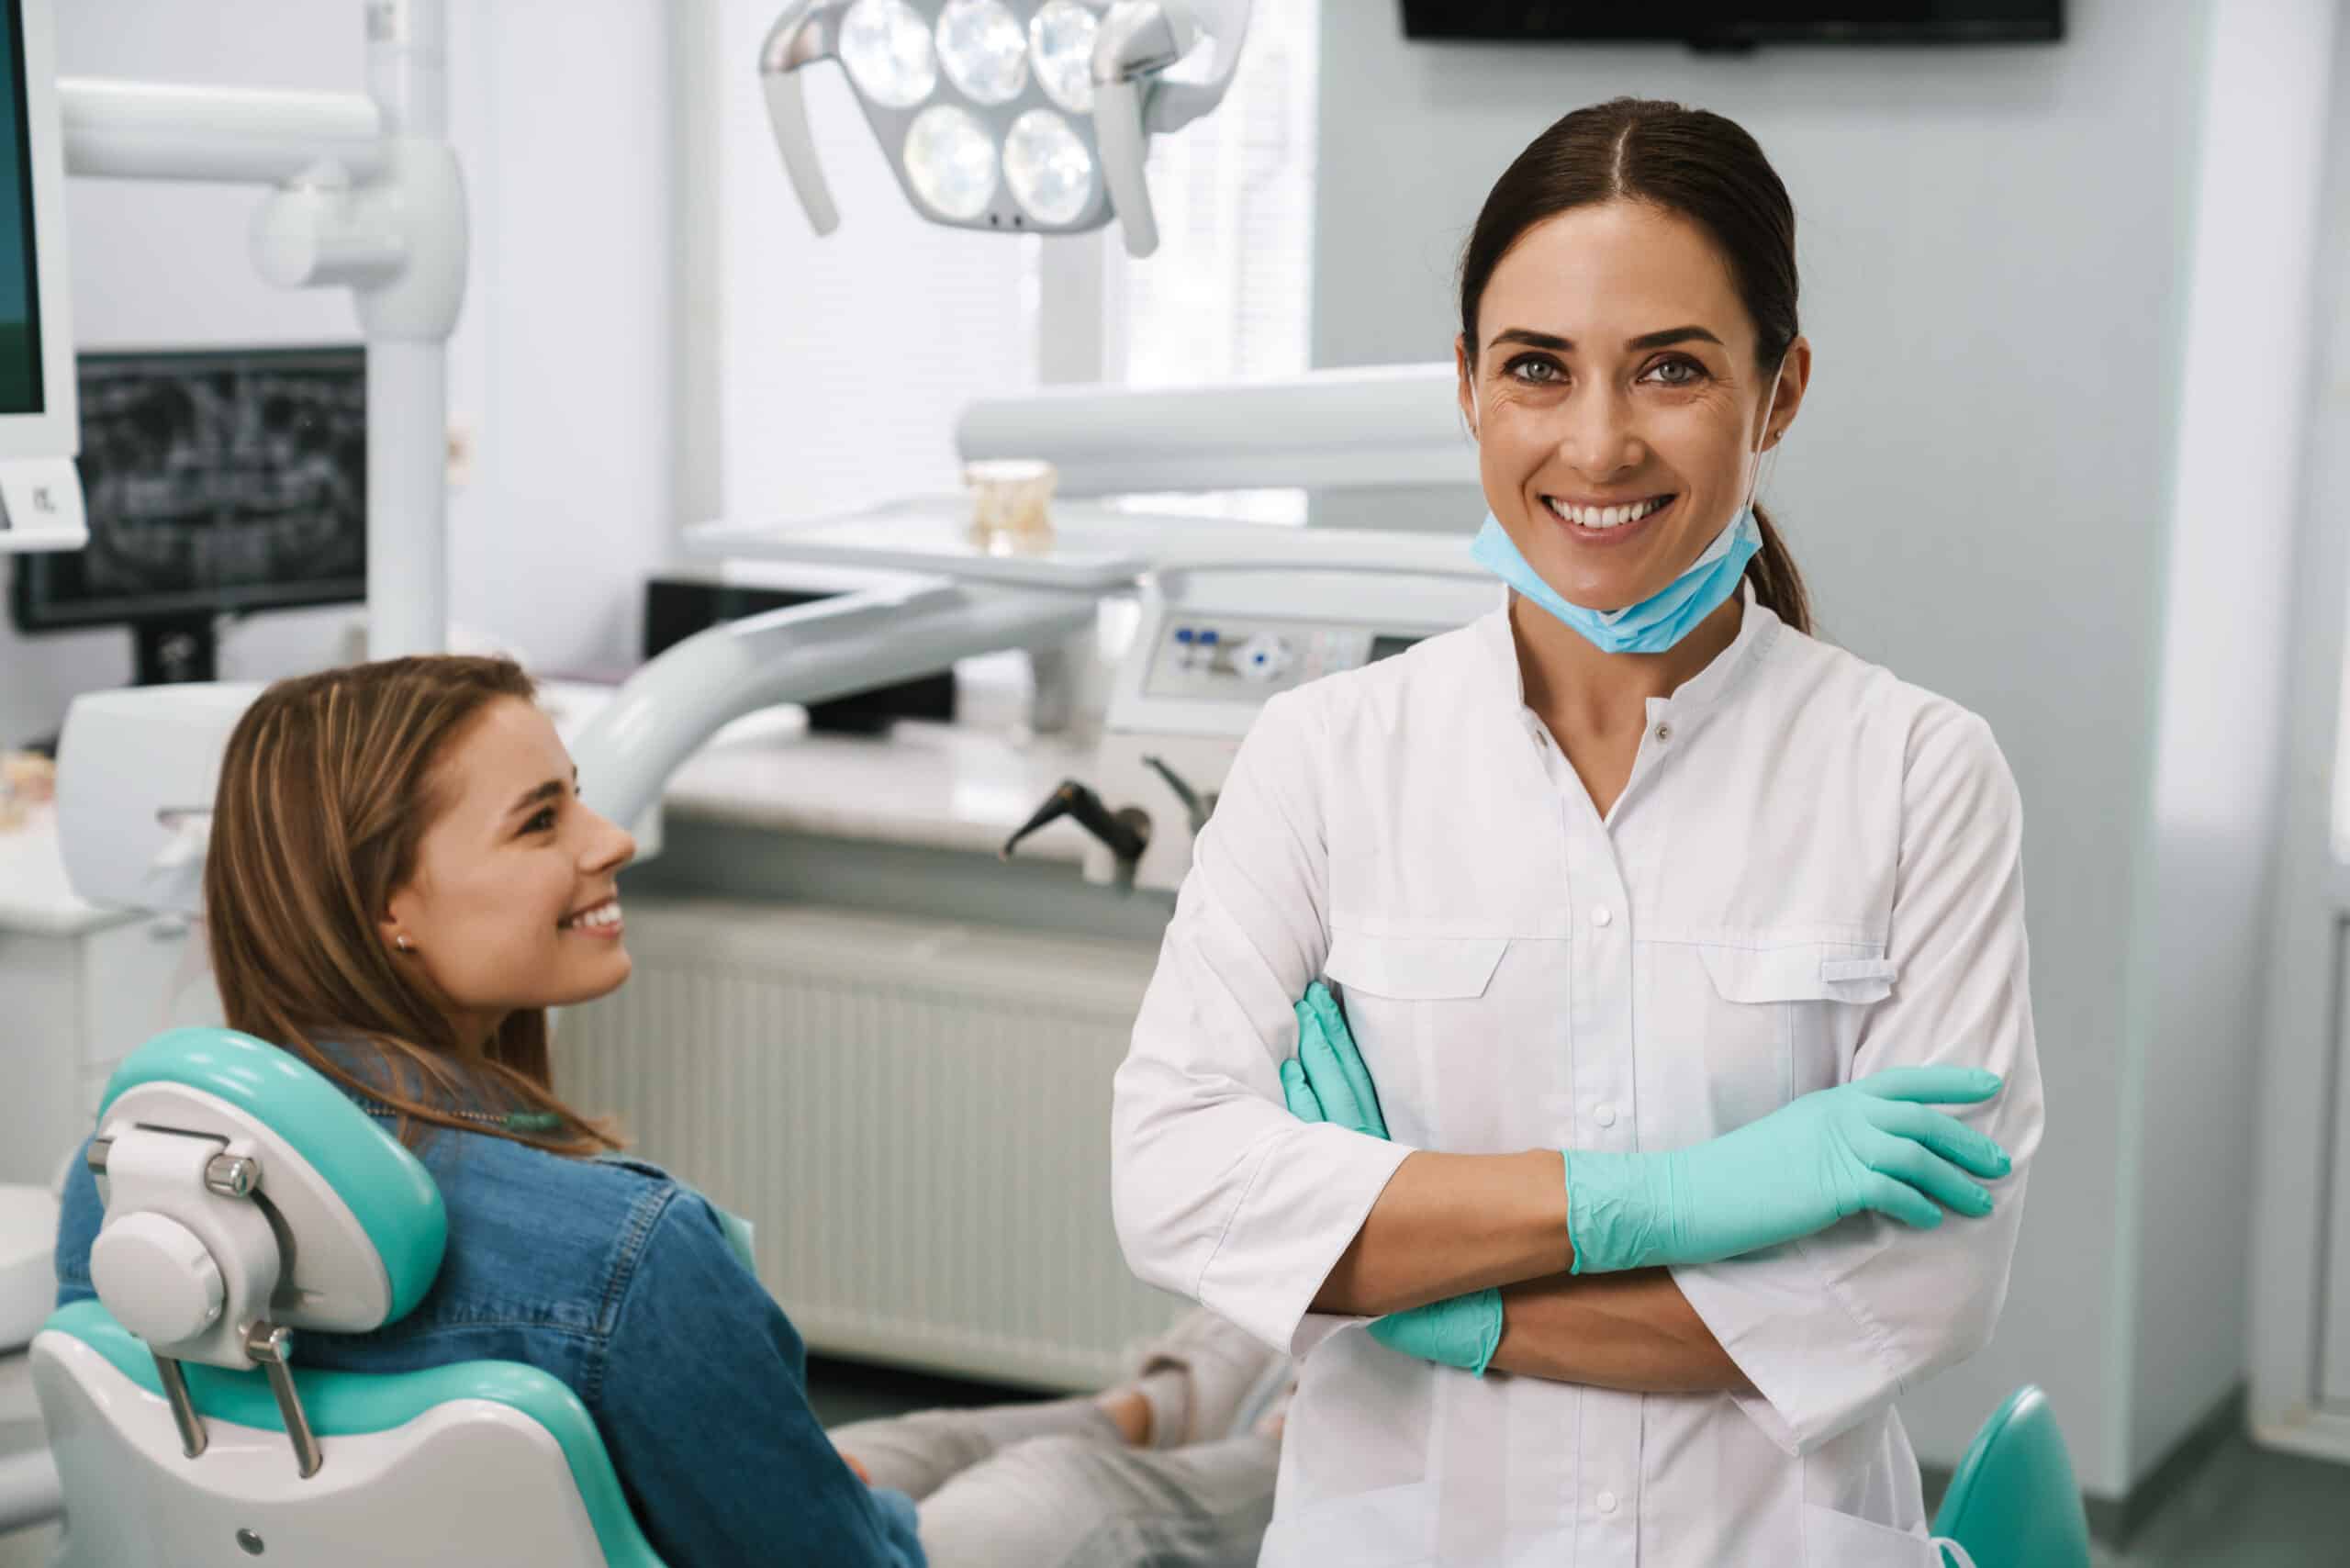 mid dentist woman smiling while working with patient in dental clinic